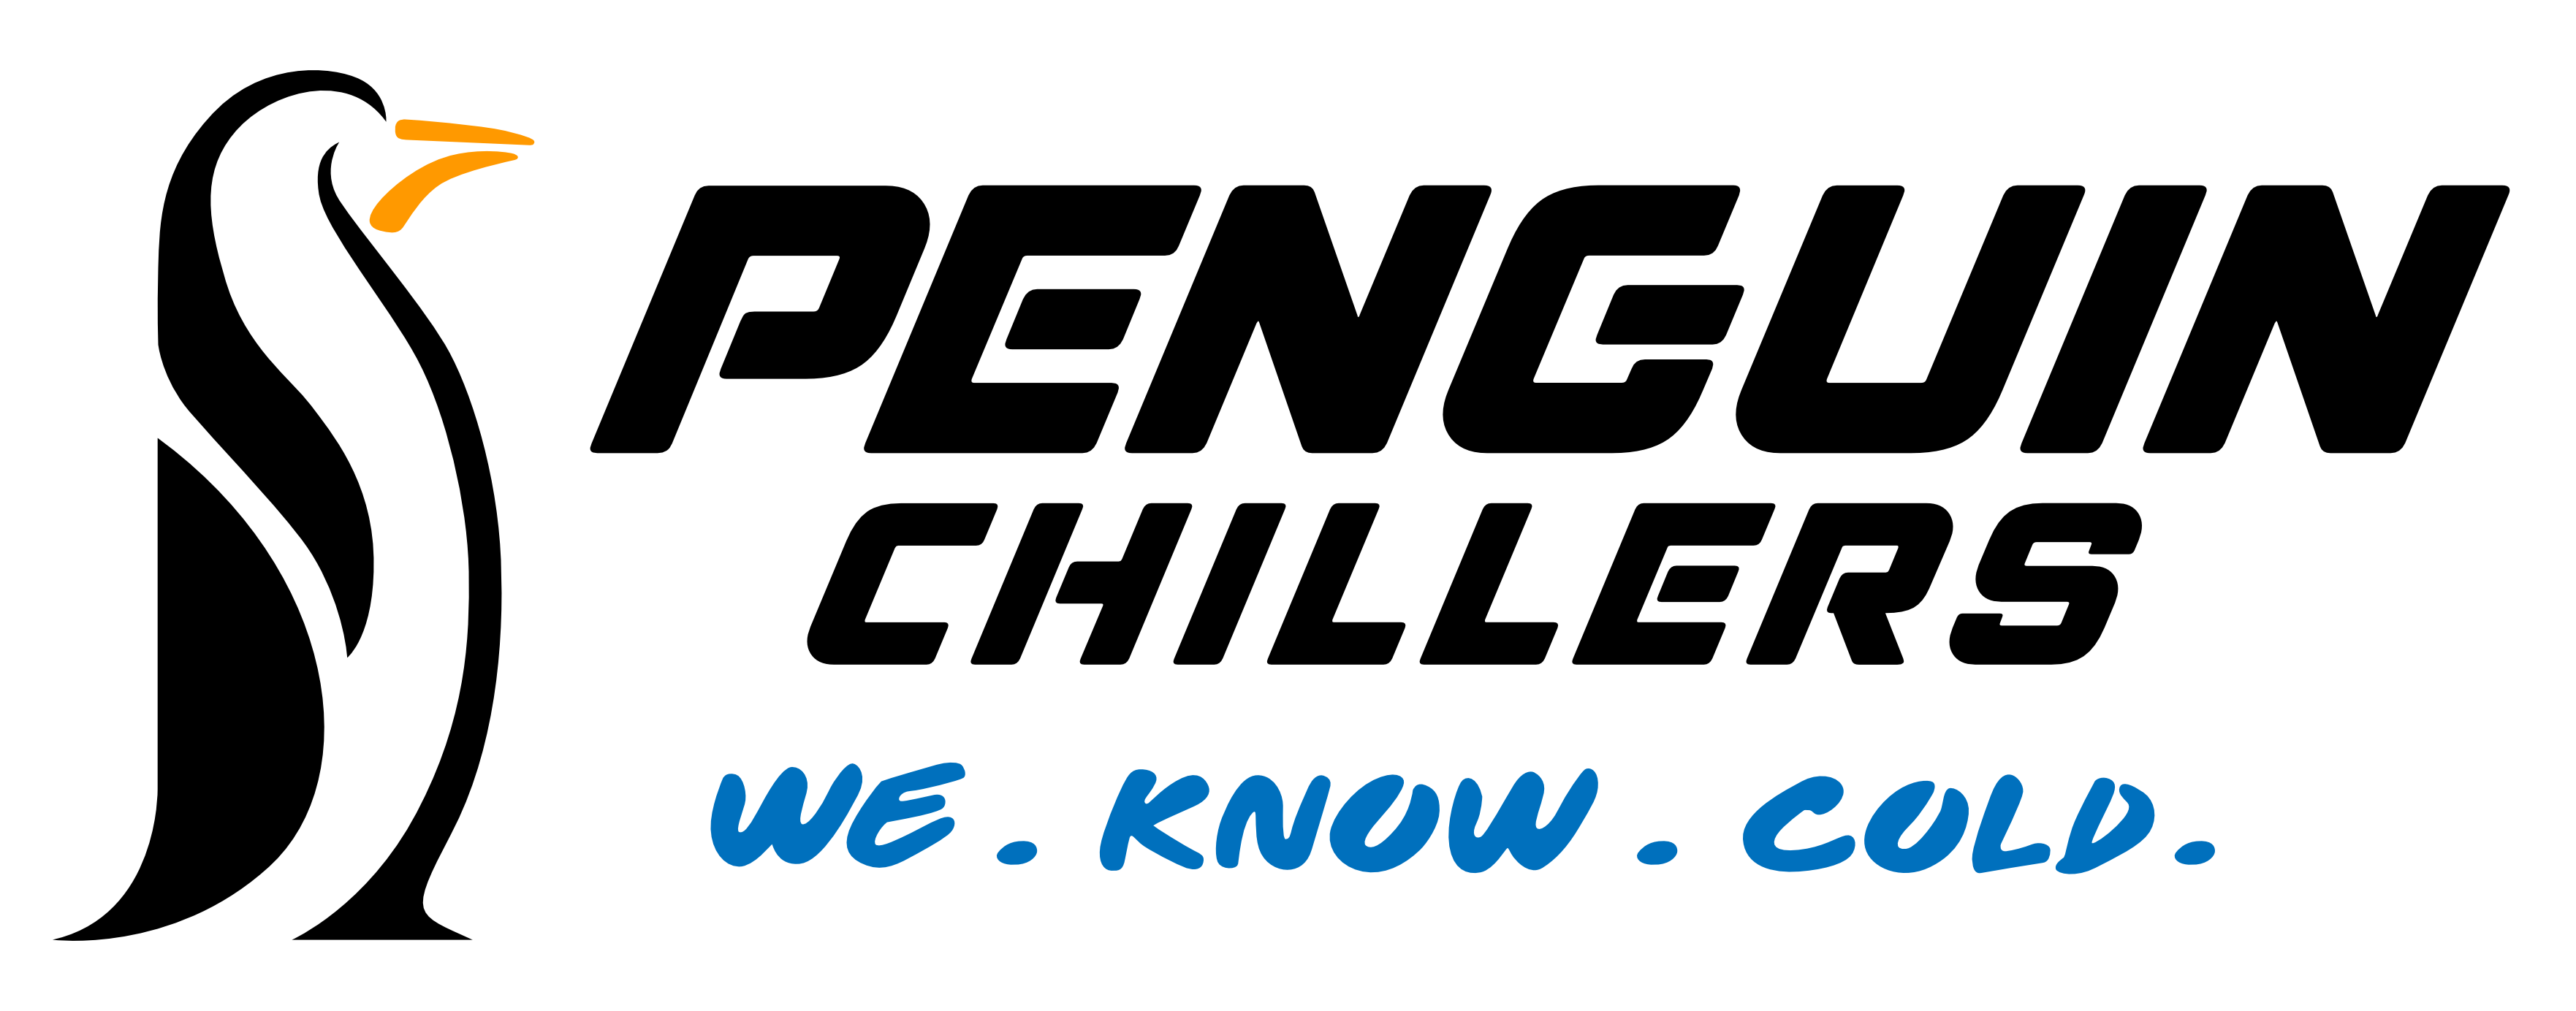 Penguin Chillers